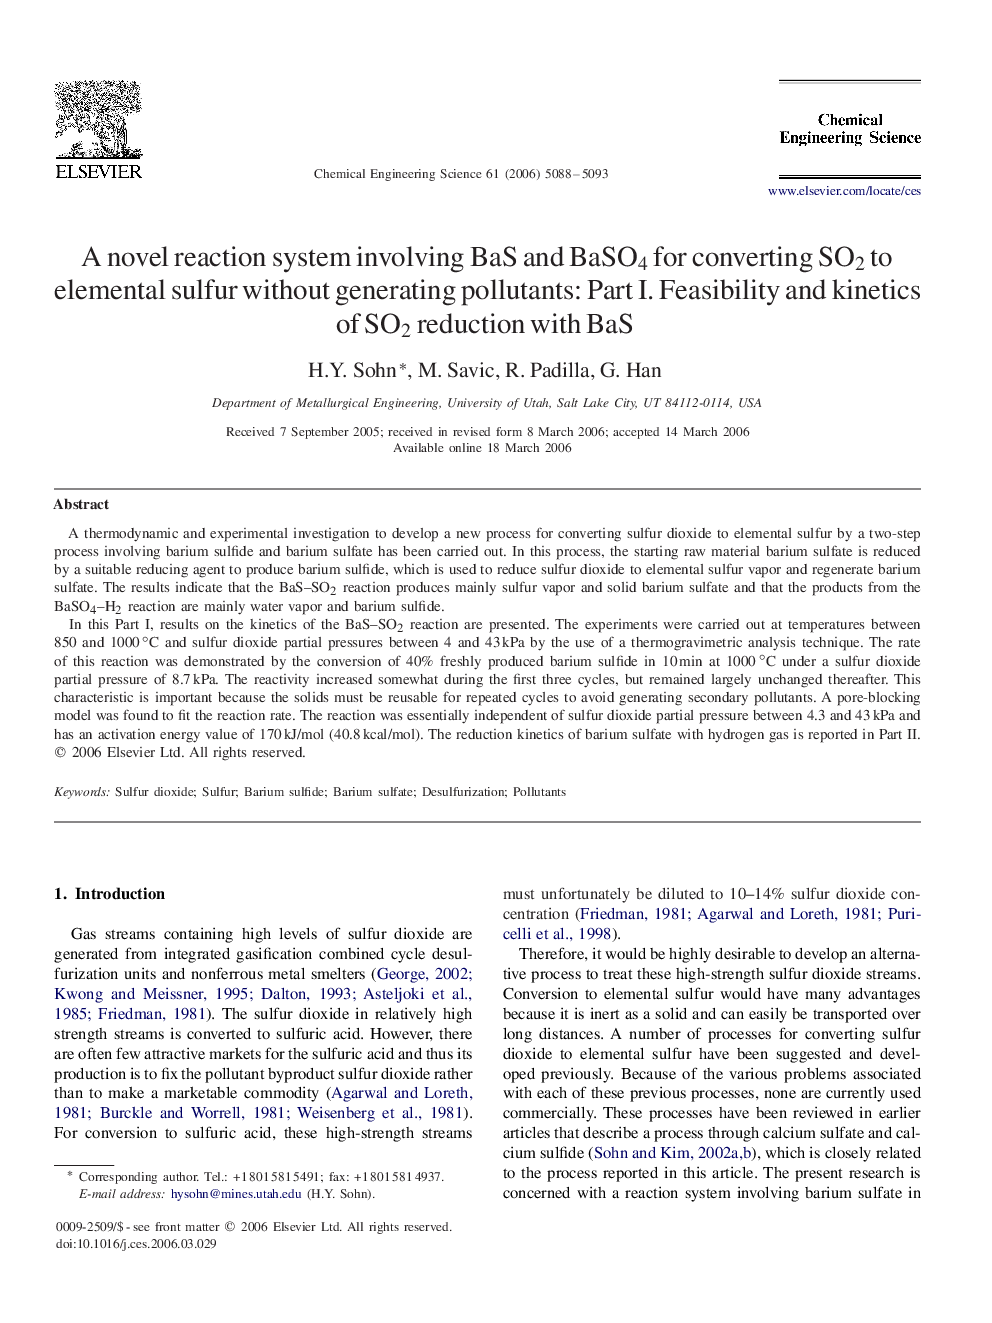 A novel reaction system involving BaS and BaSO4BaSO4 for converting SO2SO2 to elemental sulfur without generating pollutants: Part I. Feasibility and kinetics of SO2SO2 reduction with BaS